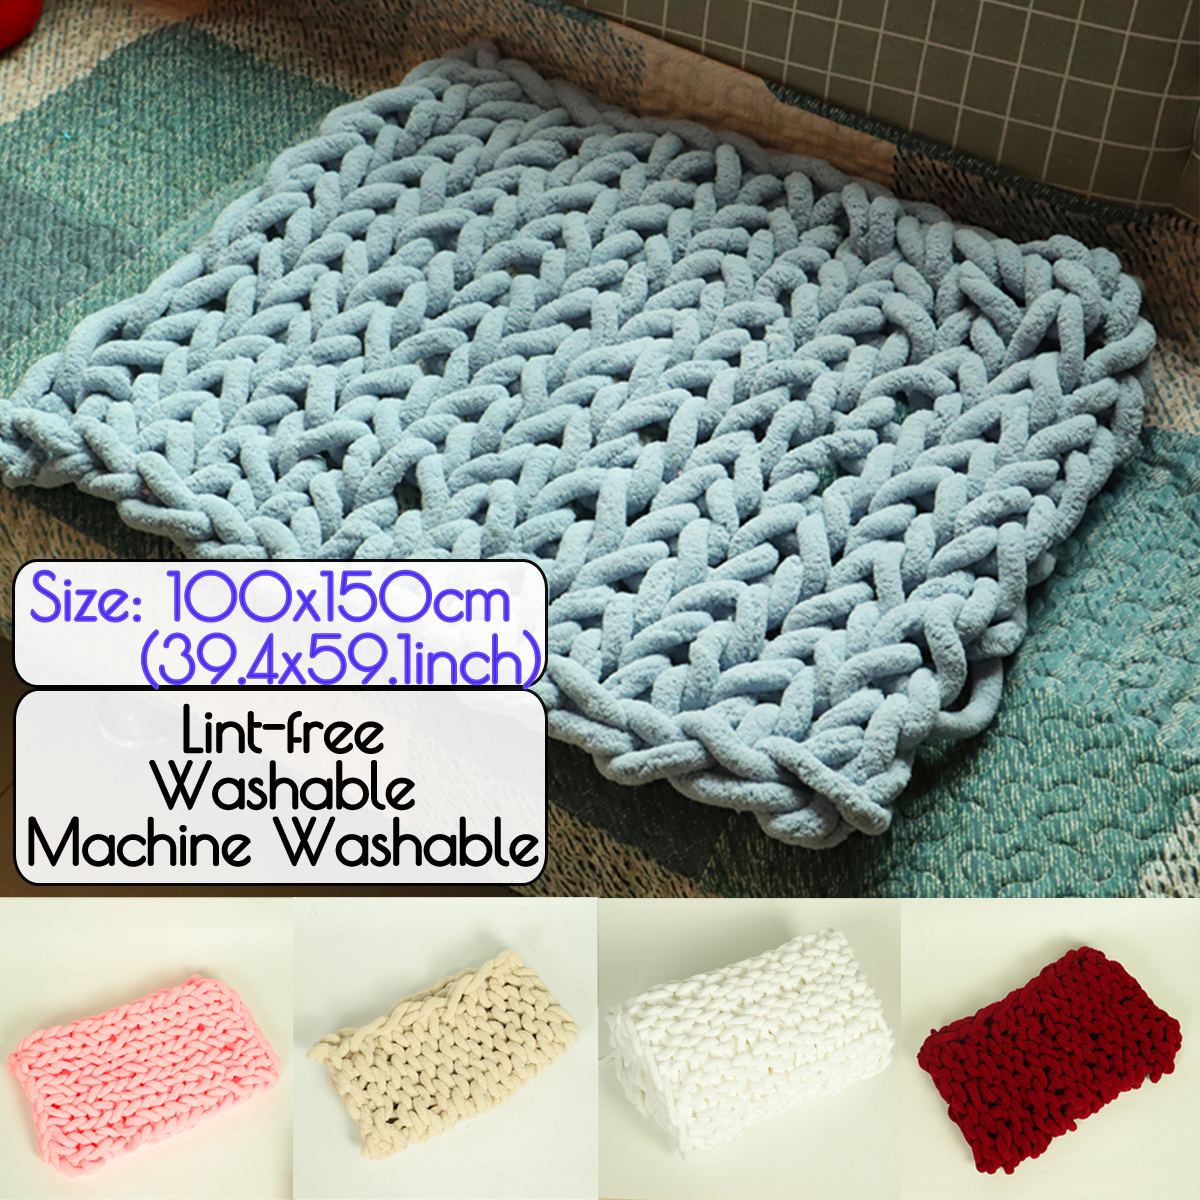 100x150cm-Handmade-Knitted-Blanket-Cotton-Soft-Washable-Lint-free-Throw-Blankets-1422186-10